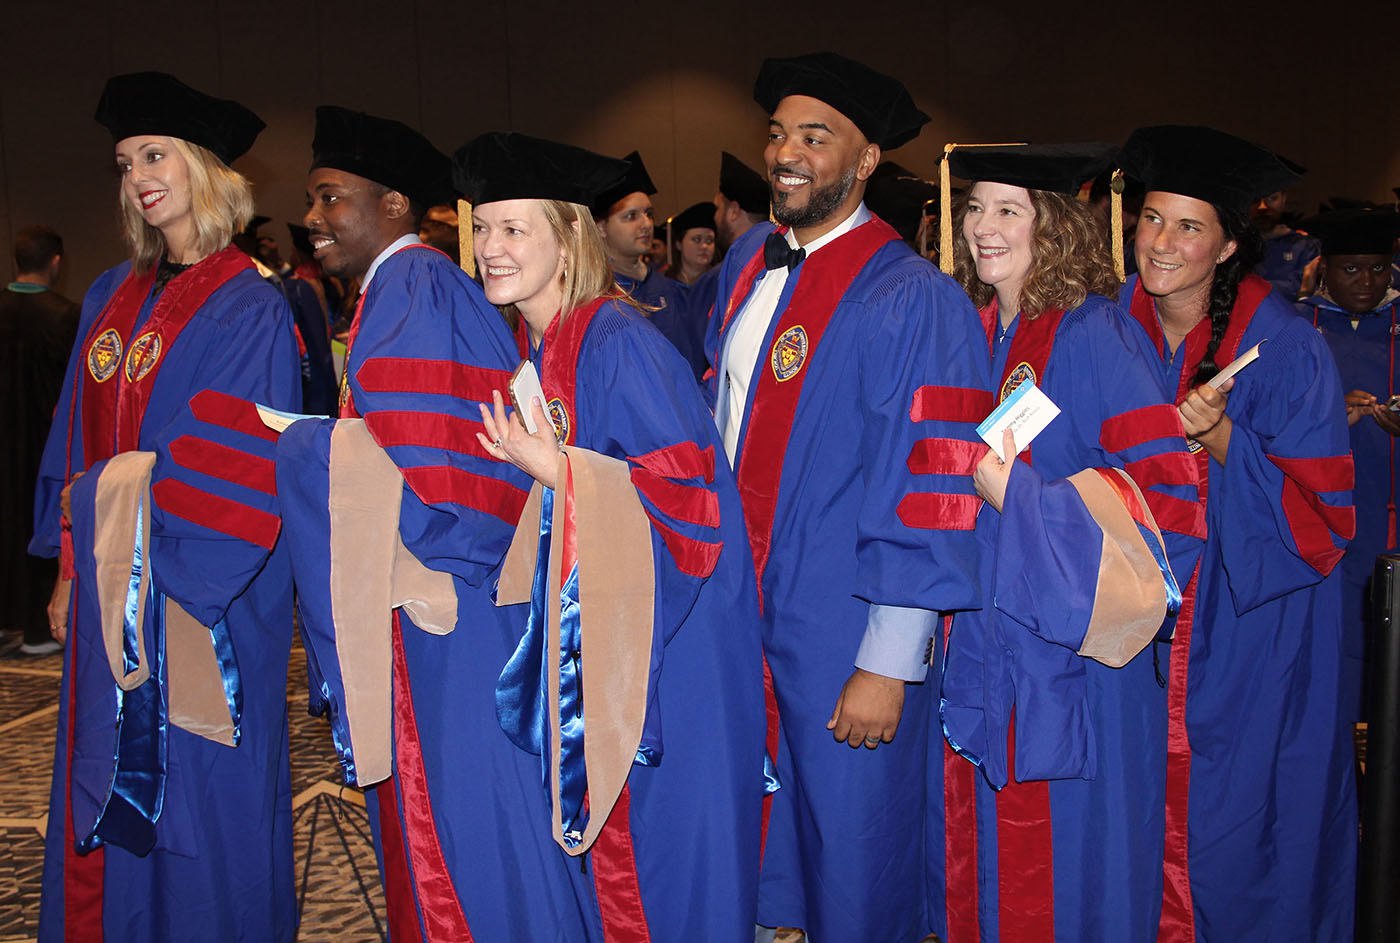 The first graduating class earning a Doctorate of Business Administration from DePaul University 